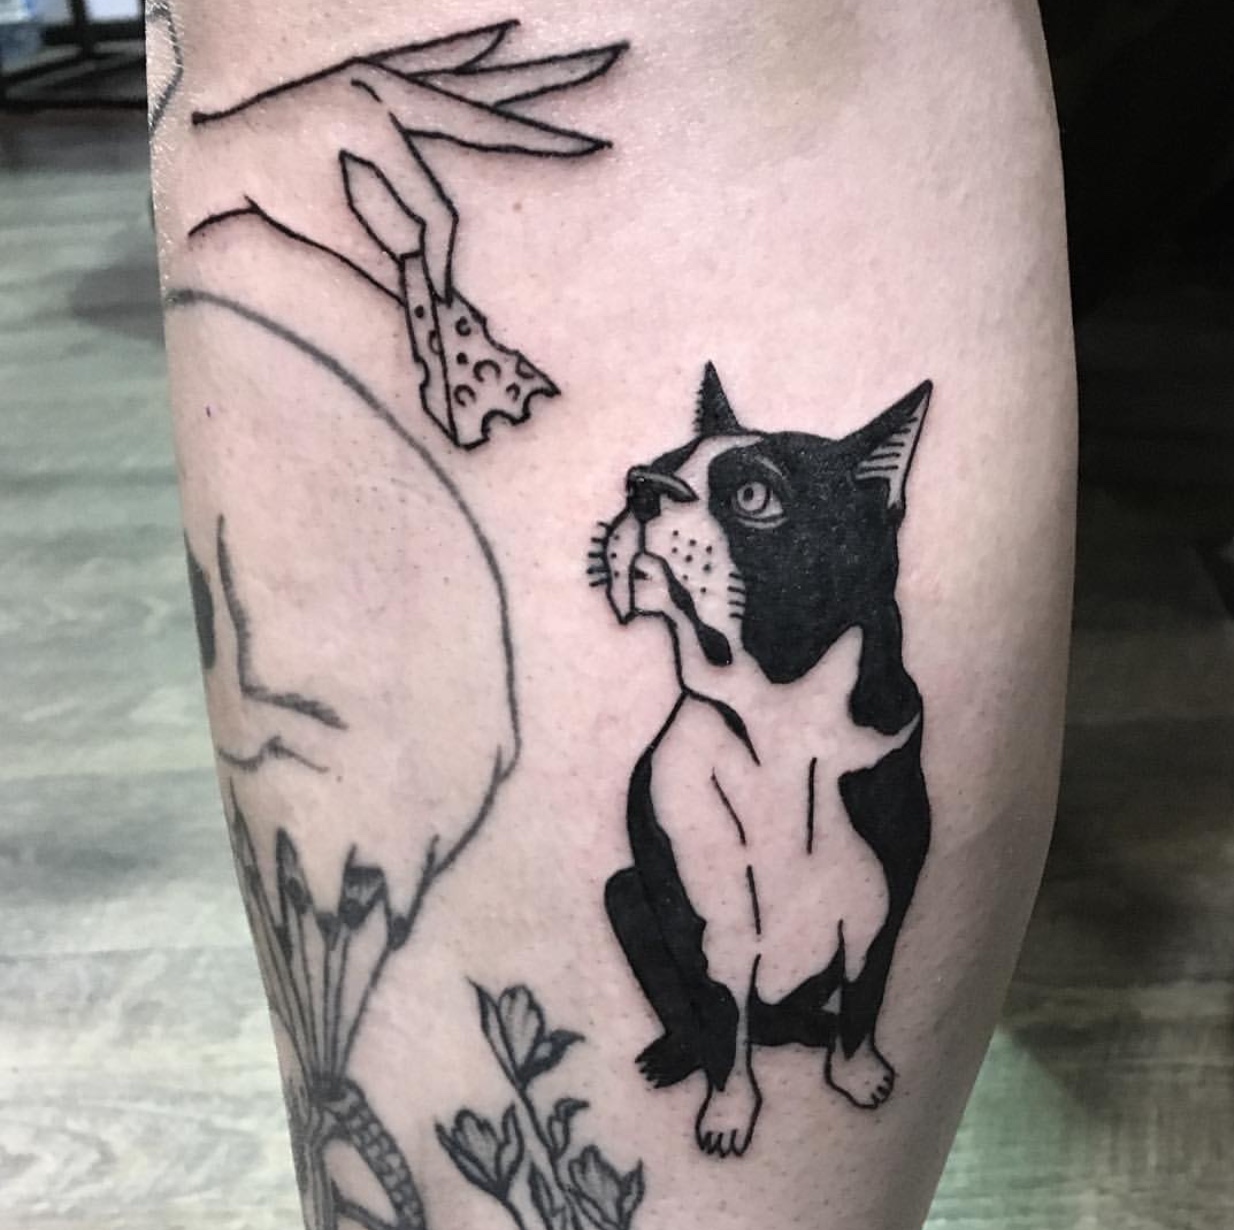 Boston Terrier sitting while looking at a piece of cheese in the hands of a person tattoo on the forearm